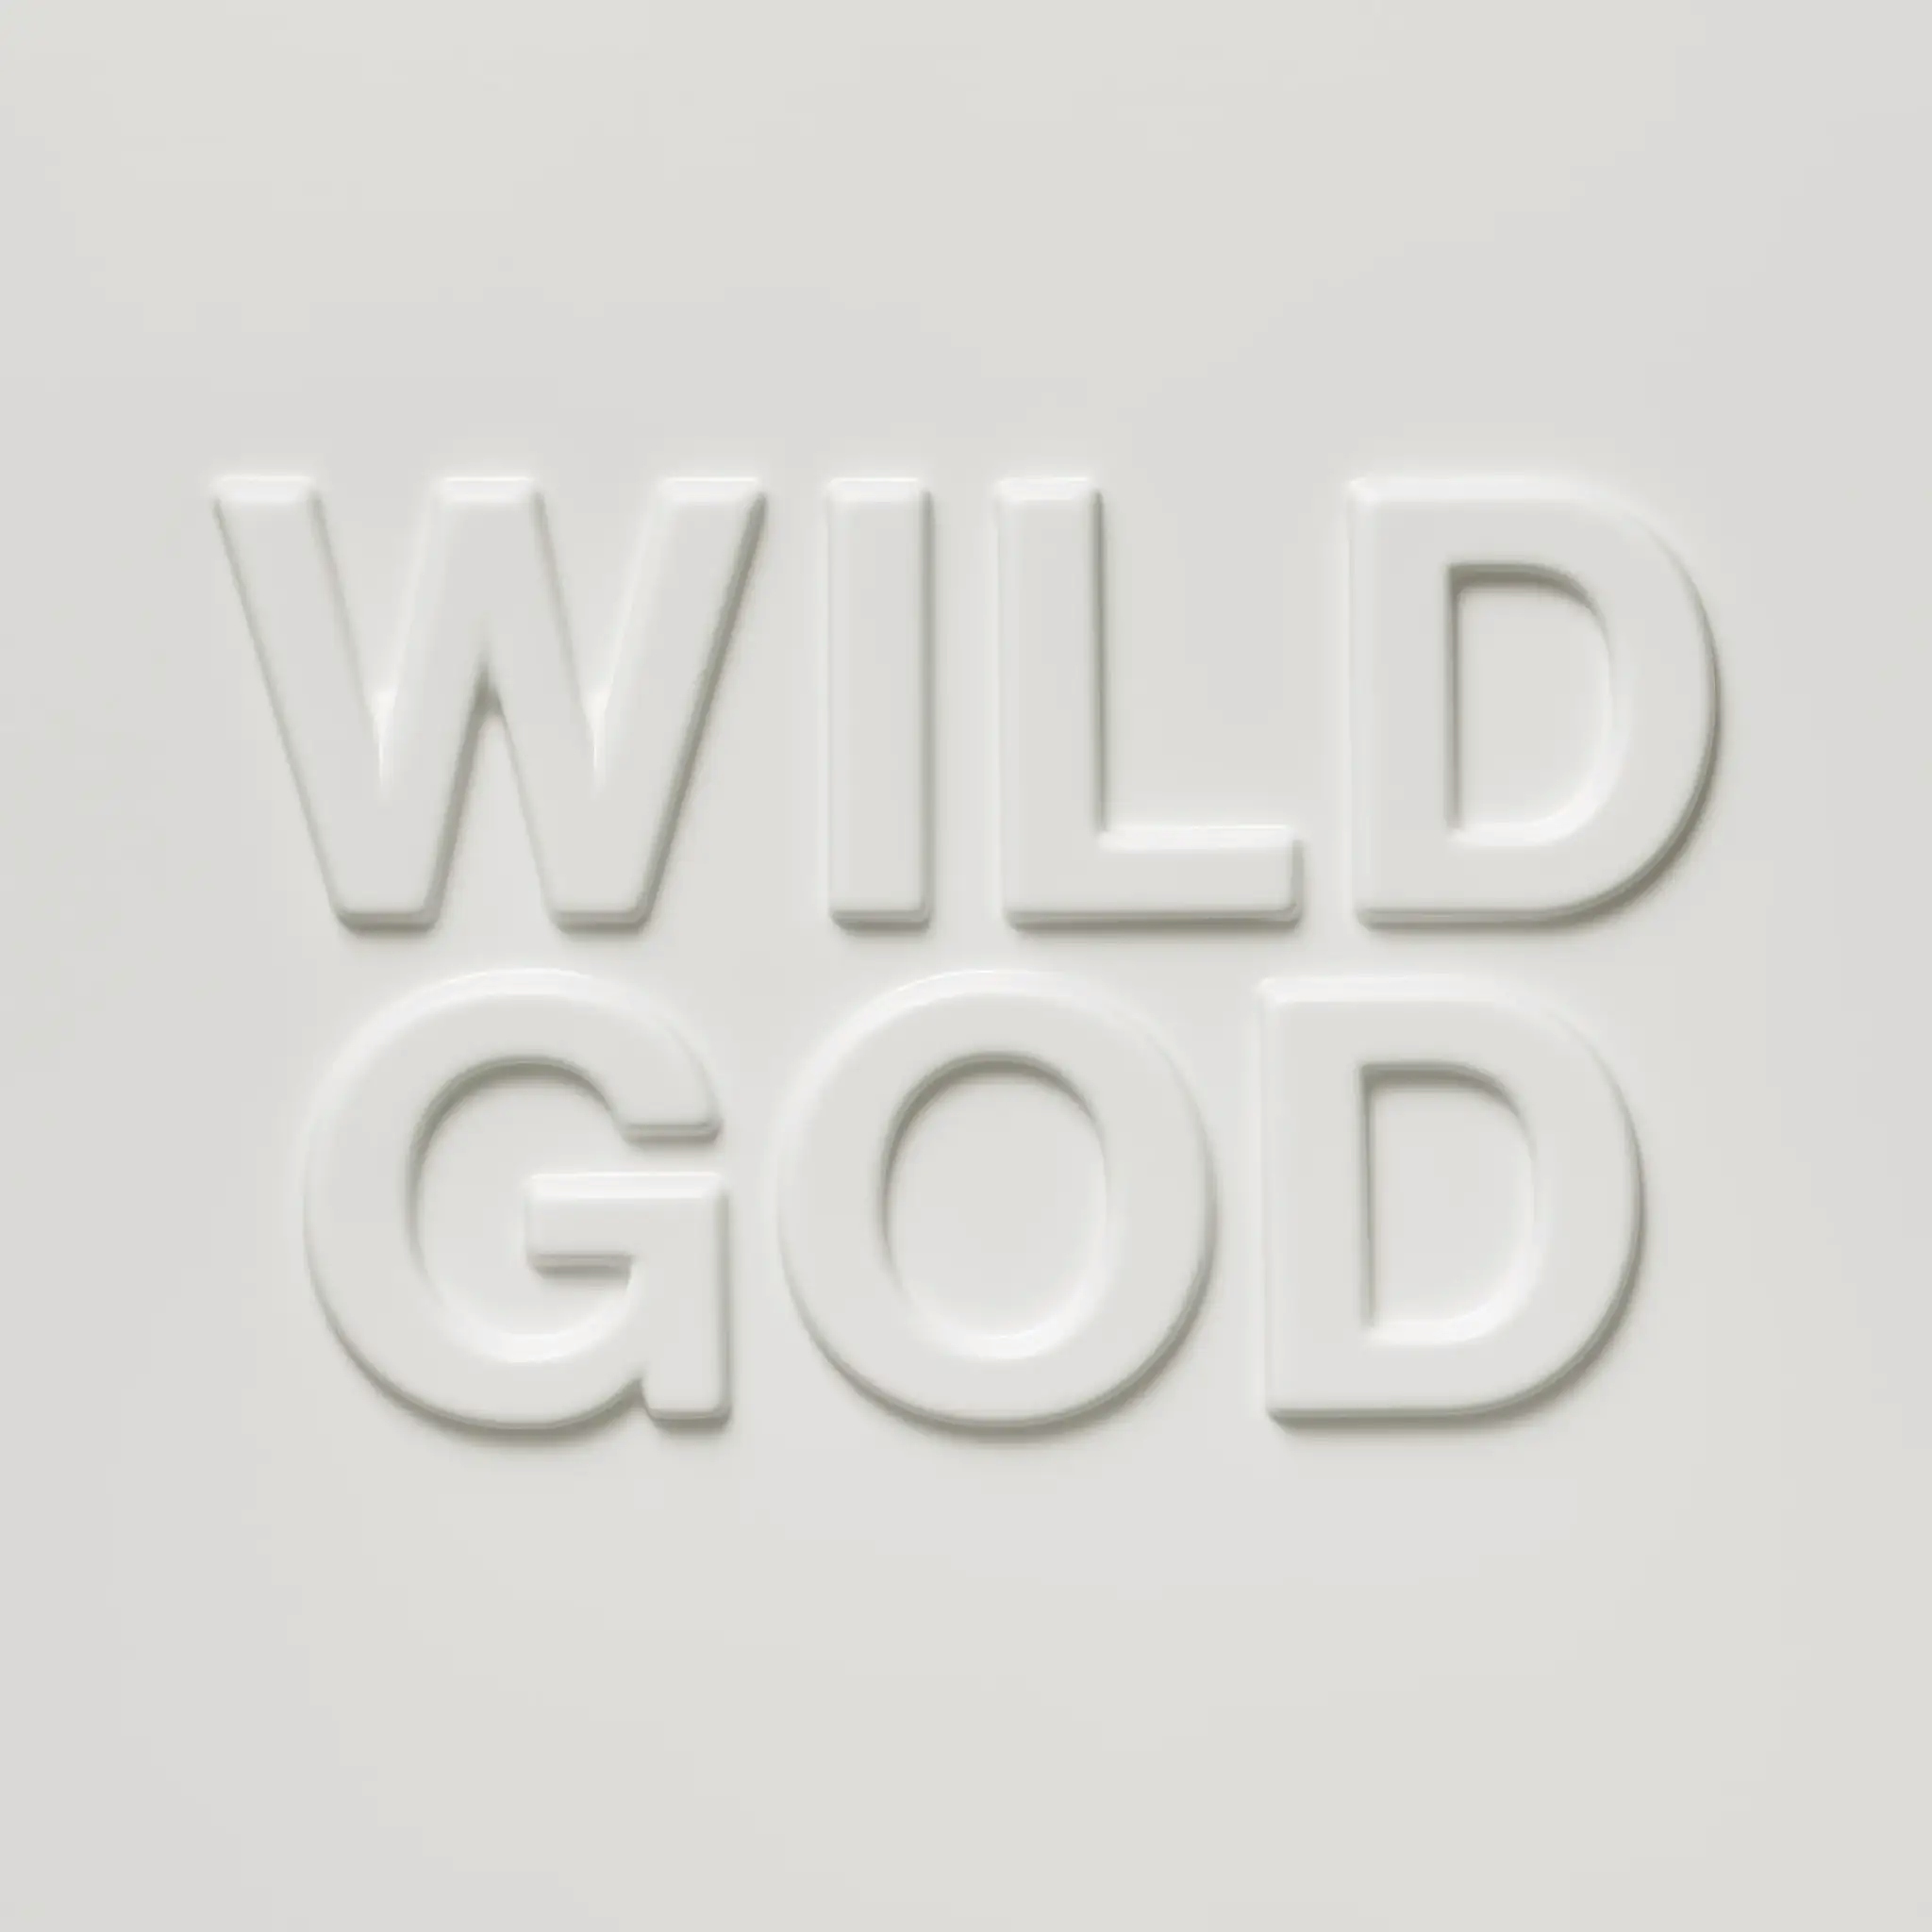 Album artwork for Wild God by Nick Cave and The Bad Seeds